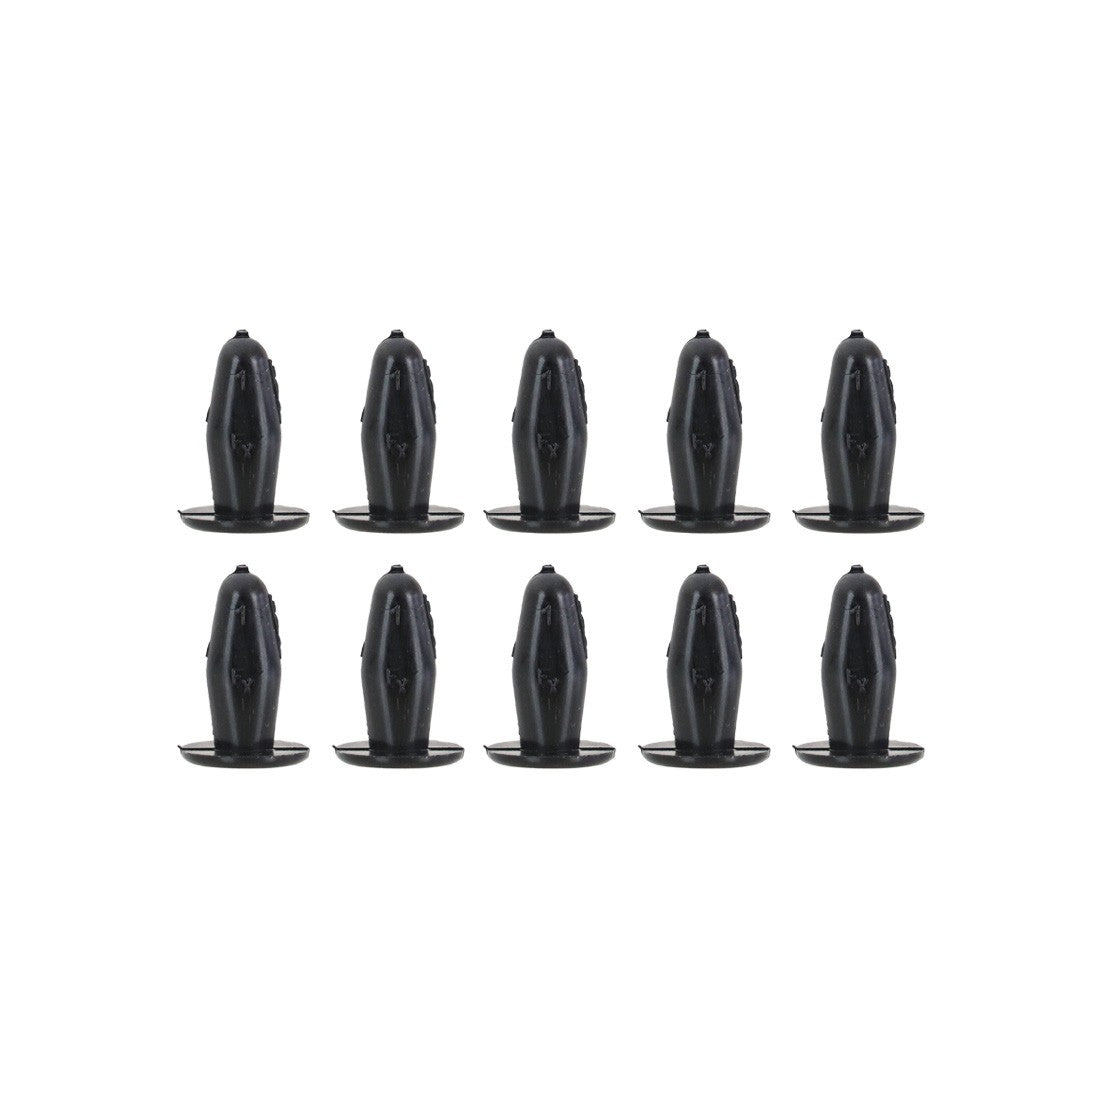 Wagtail Pivot Limiter Pins - 10 Pack Front View 10 Pack View